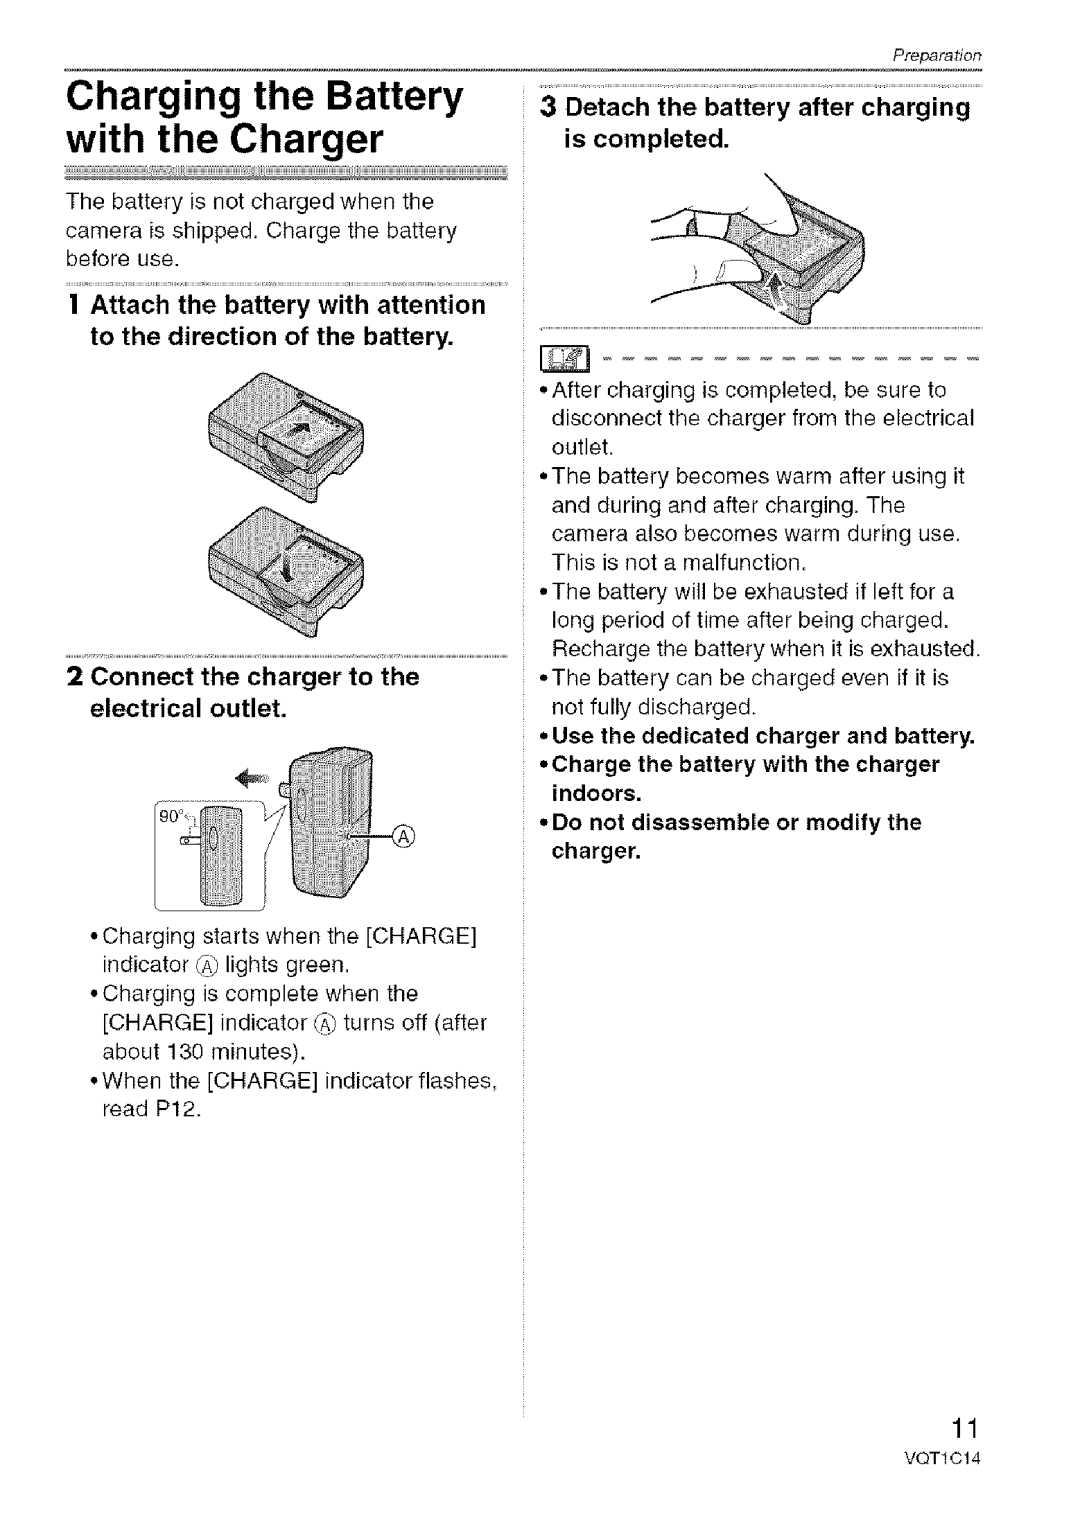 Panasonic DMC-FX10, DMC-FX12 operating instructions Charging the Battery with the Charger 